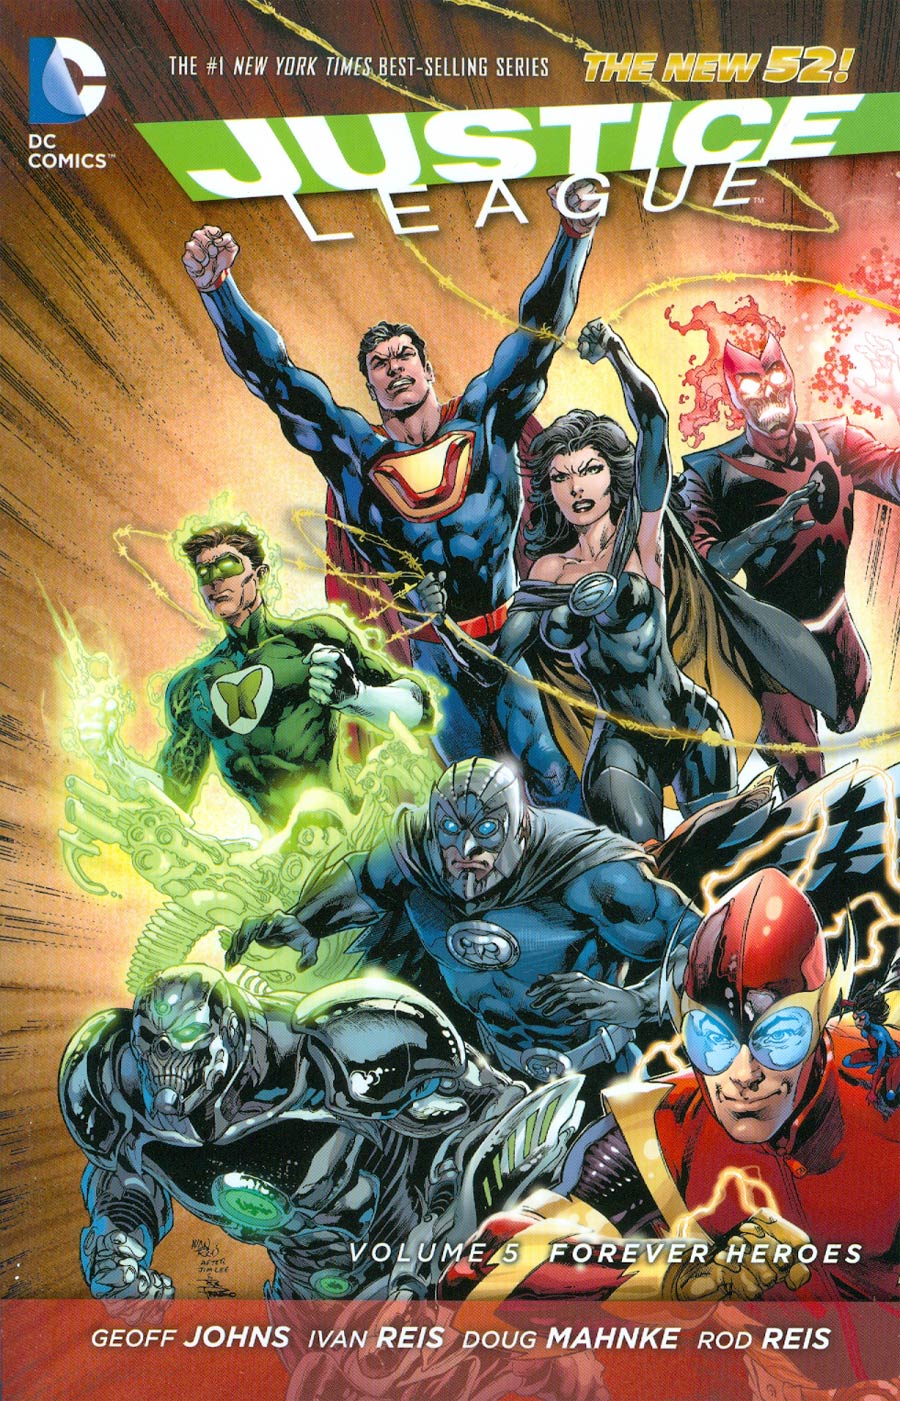 Justice League (New 52) Vol 5 Forever Heroes TP